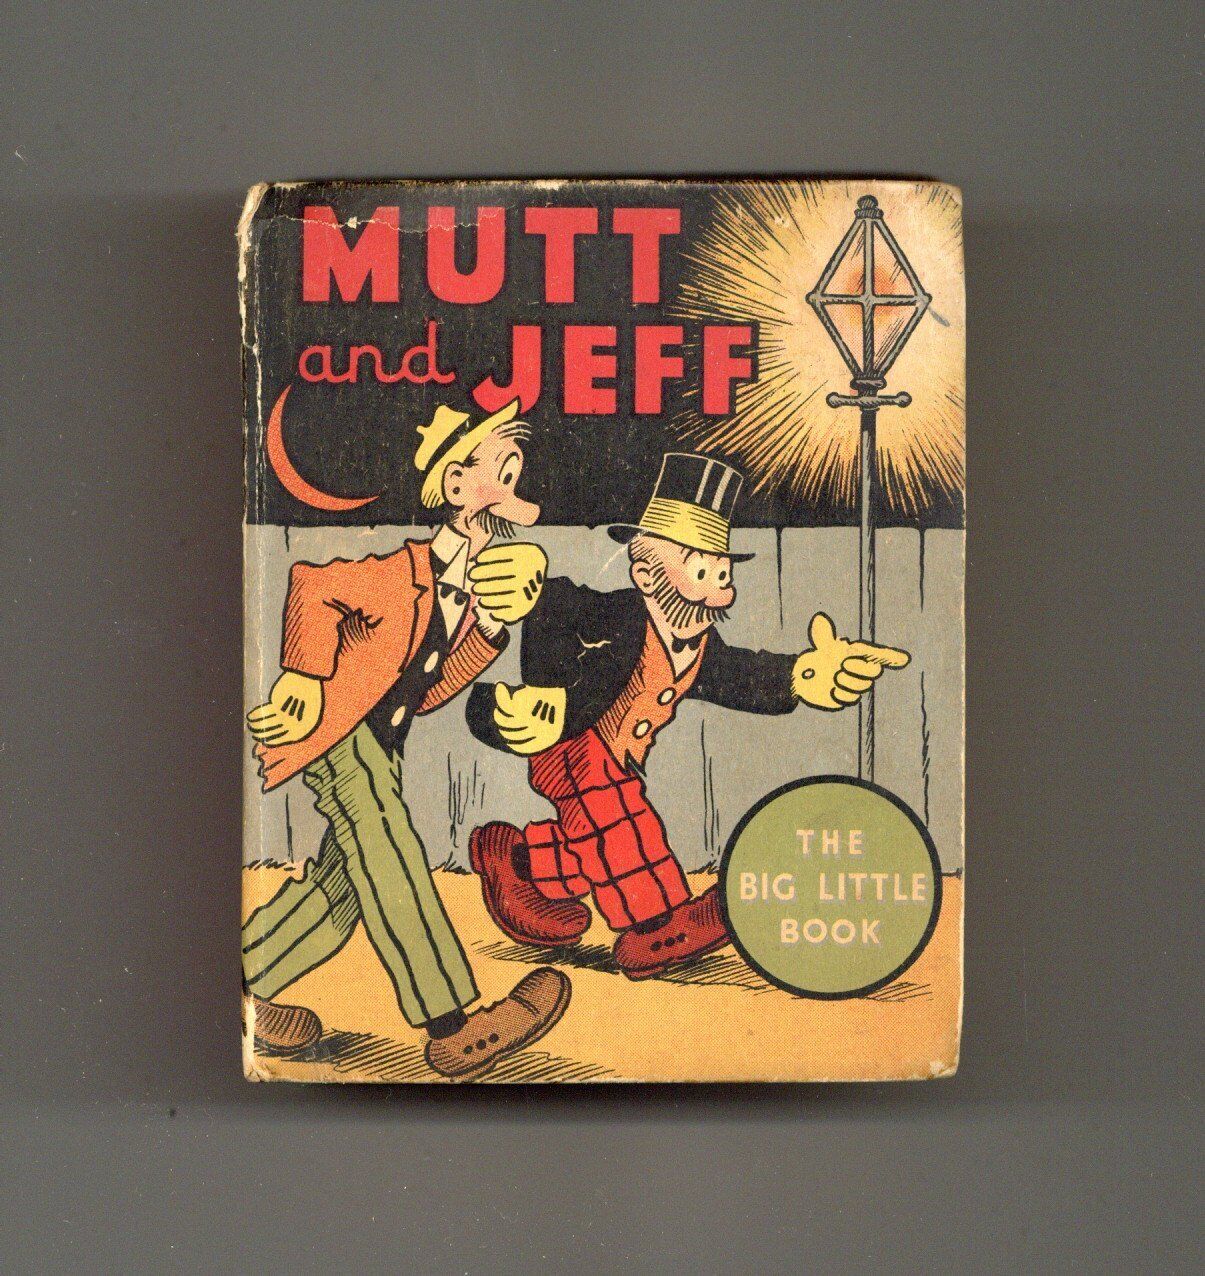 Mutt and Jeff #1113 GD 1936